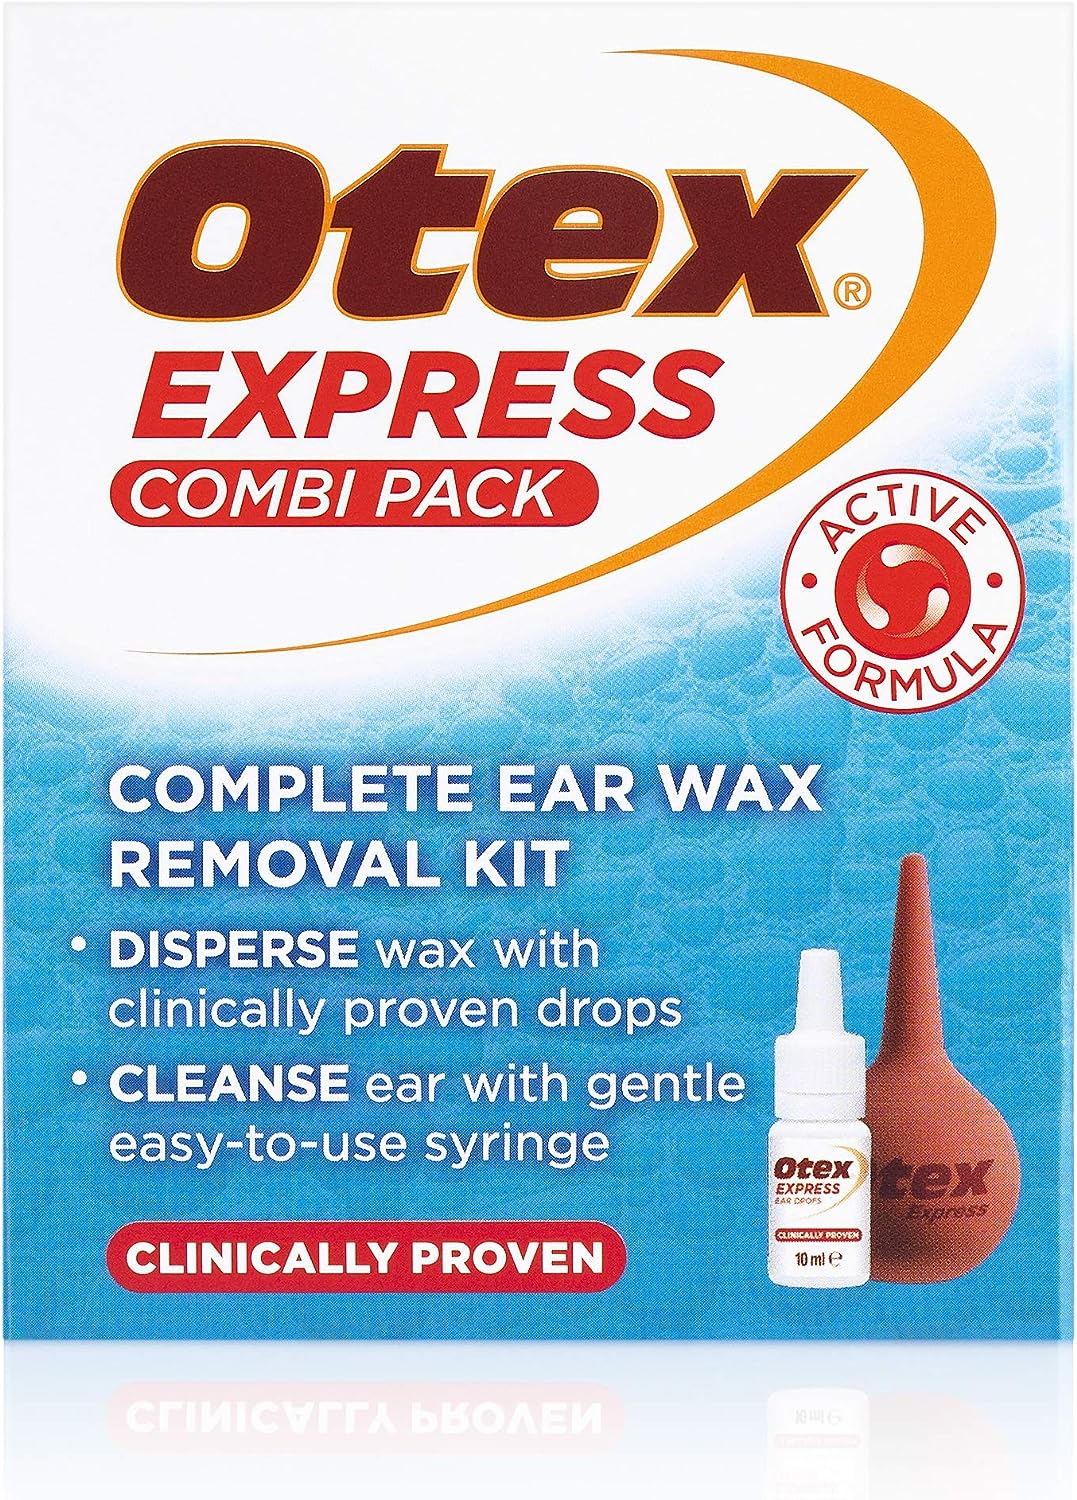 Otex Express Combi Pack Drops and Ear Syringe, 10ml